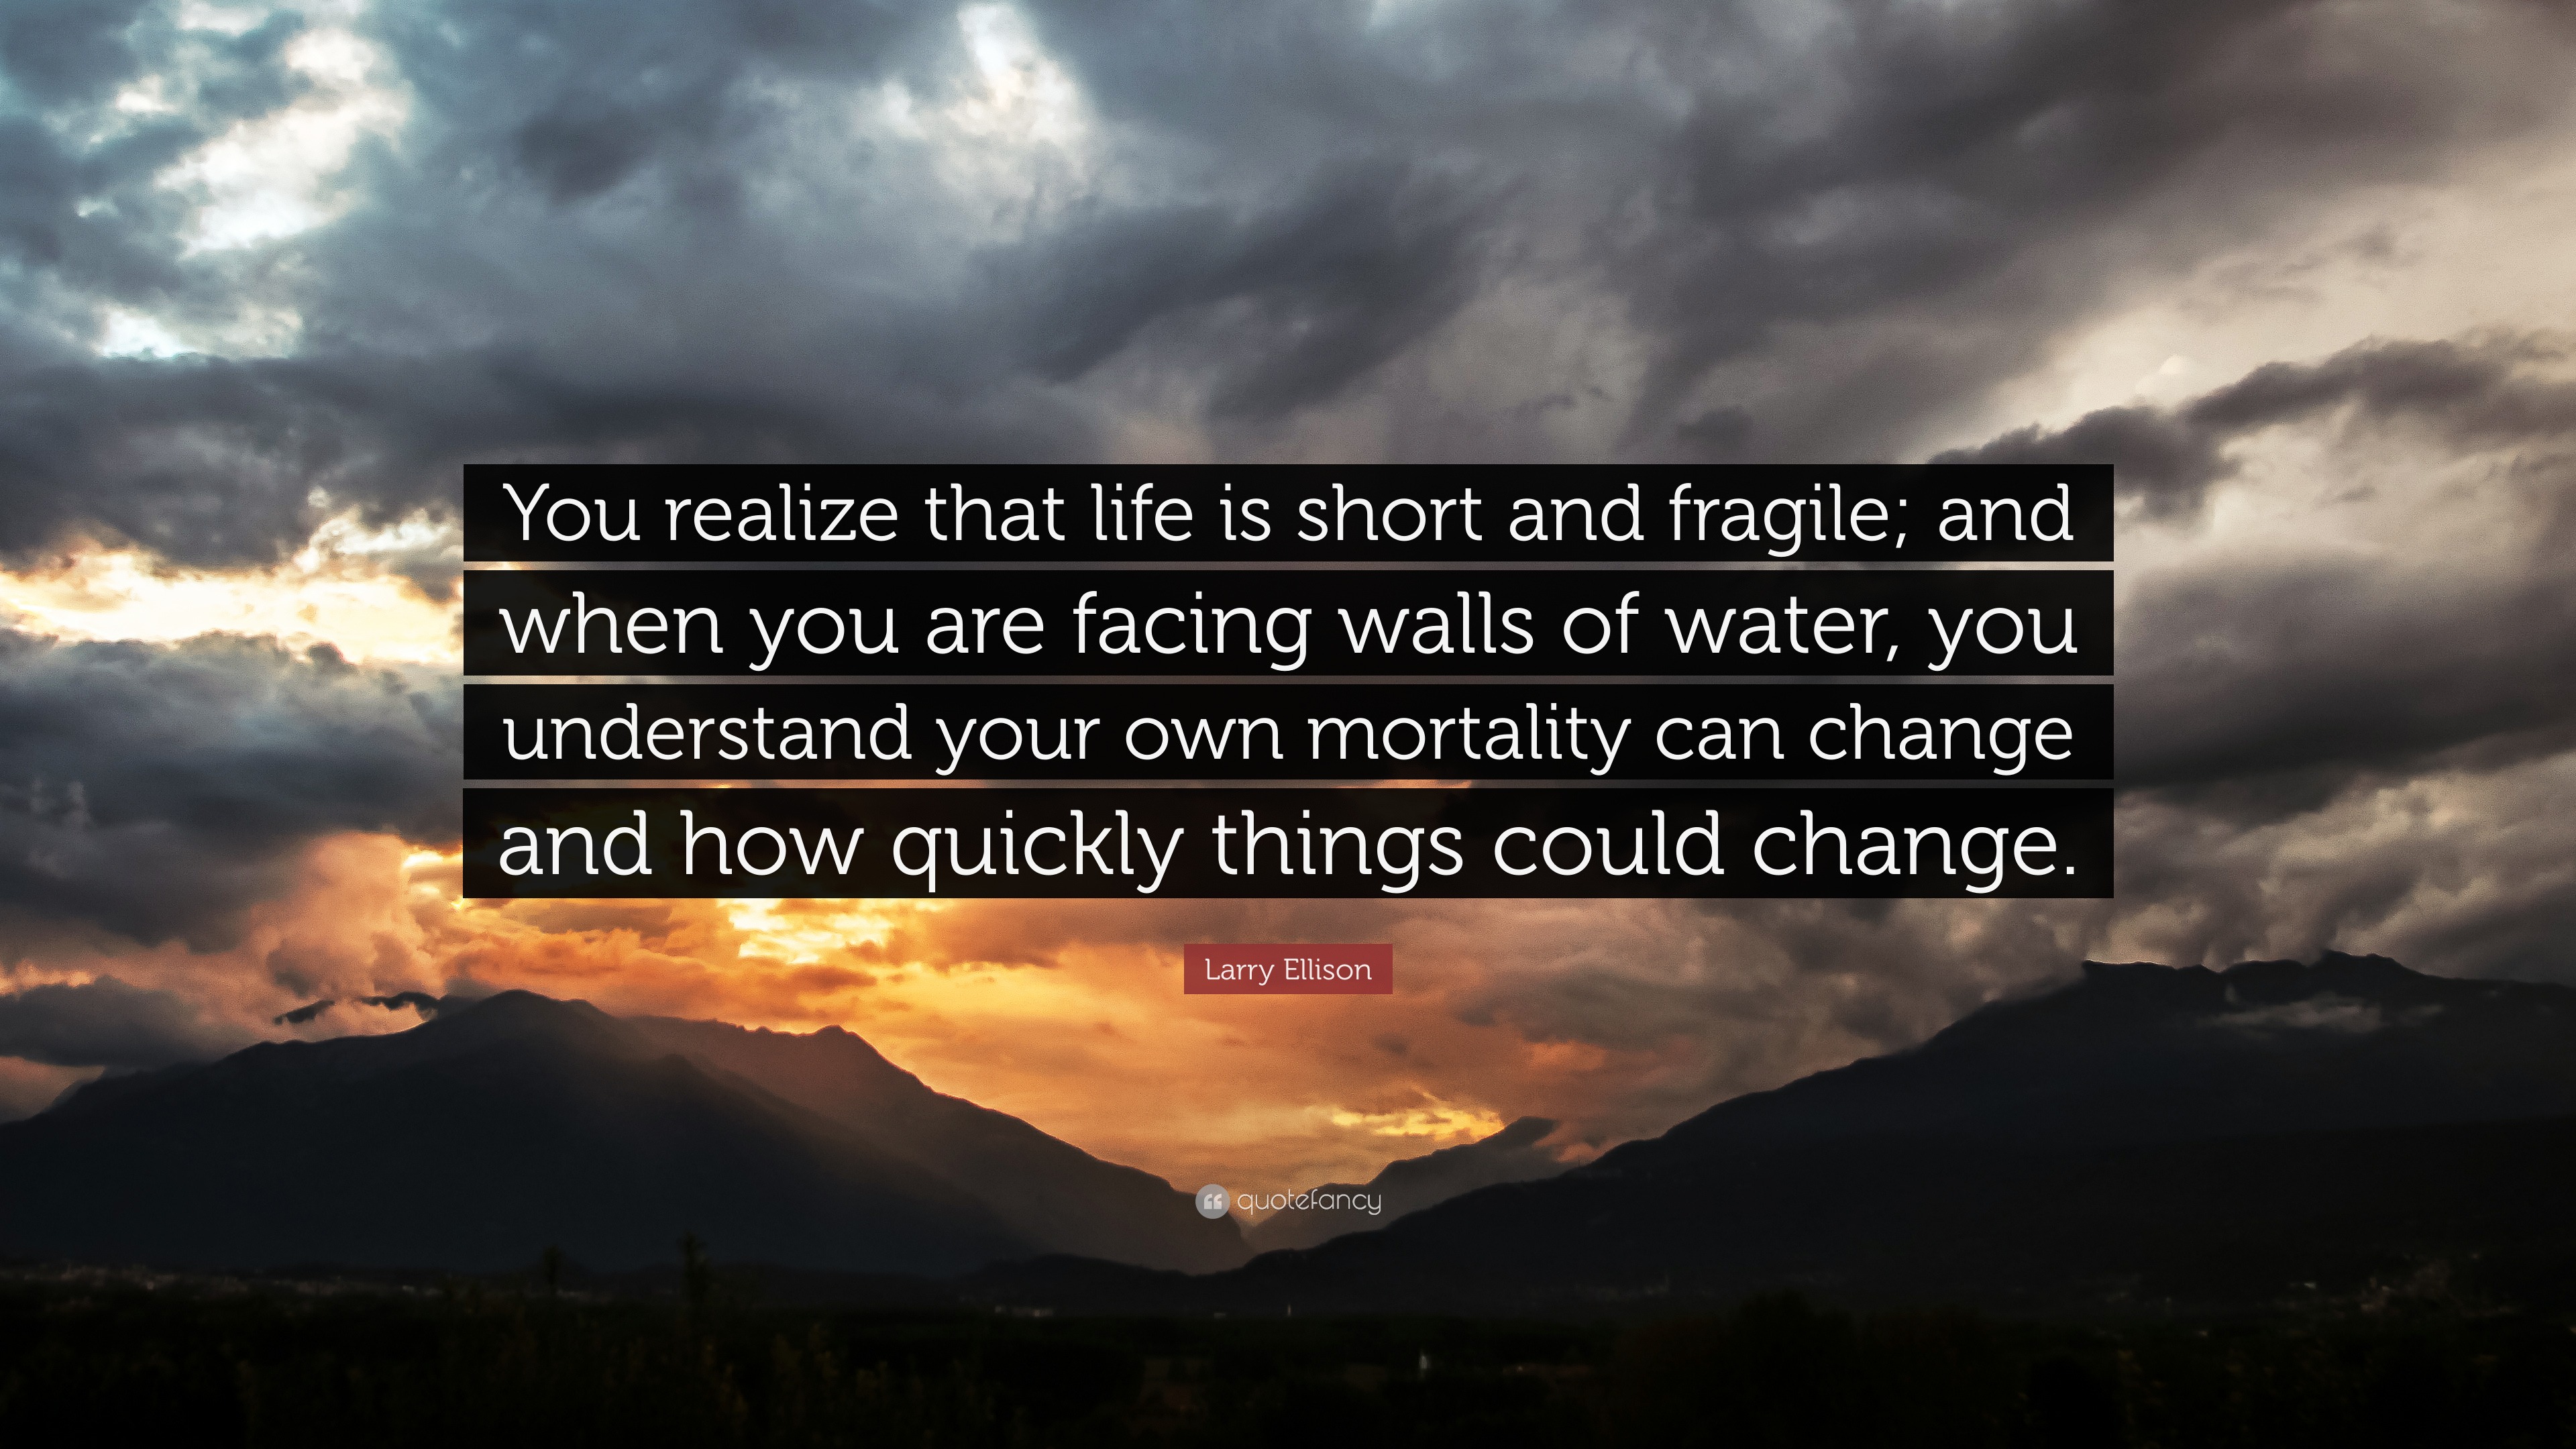 Larry Ellison Quote: "You realize that life is short and fragile; and when you are facing walls ...